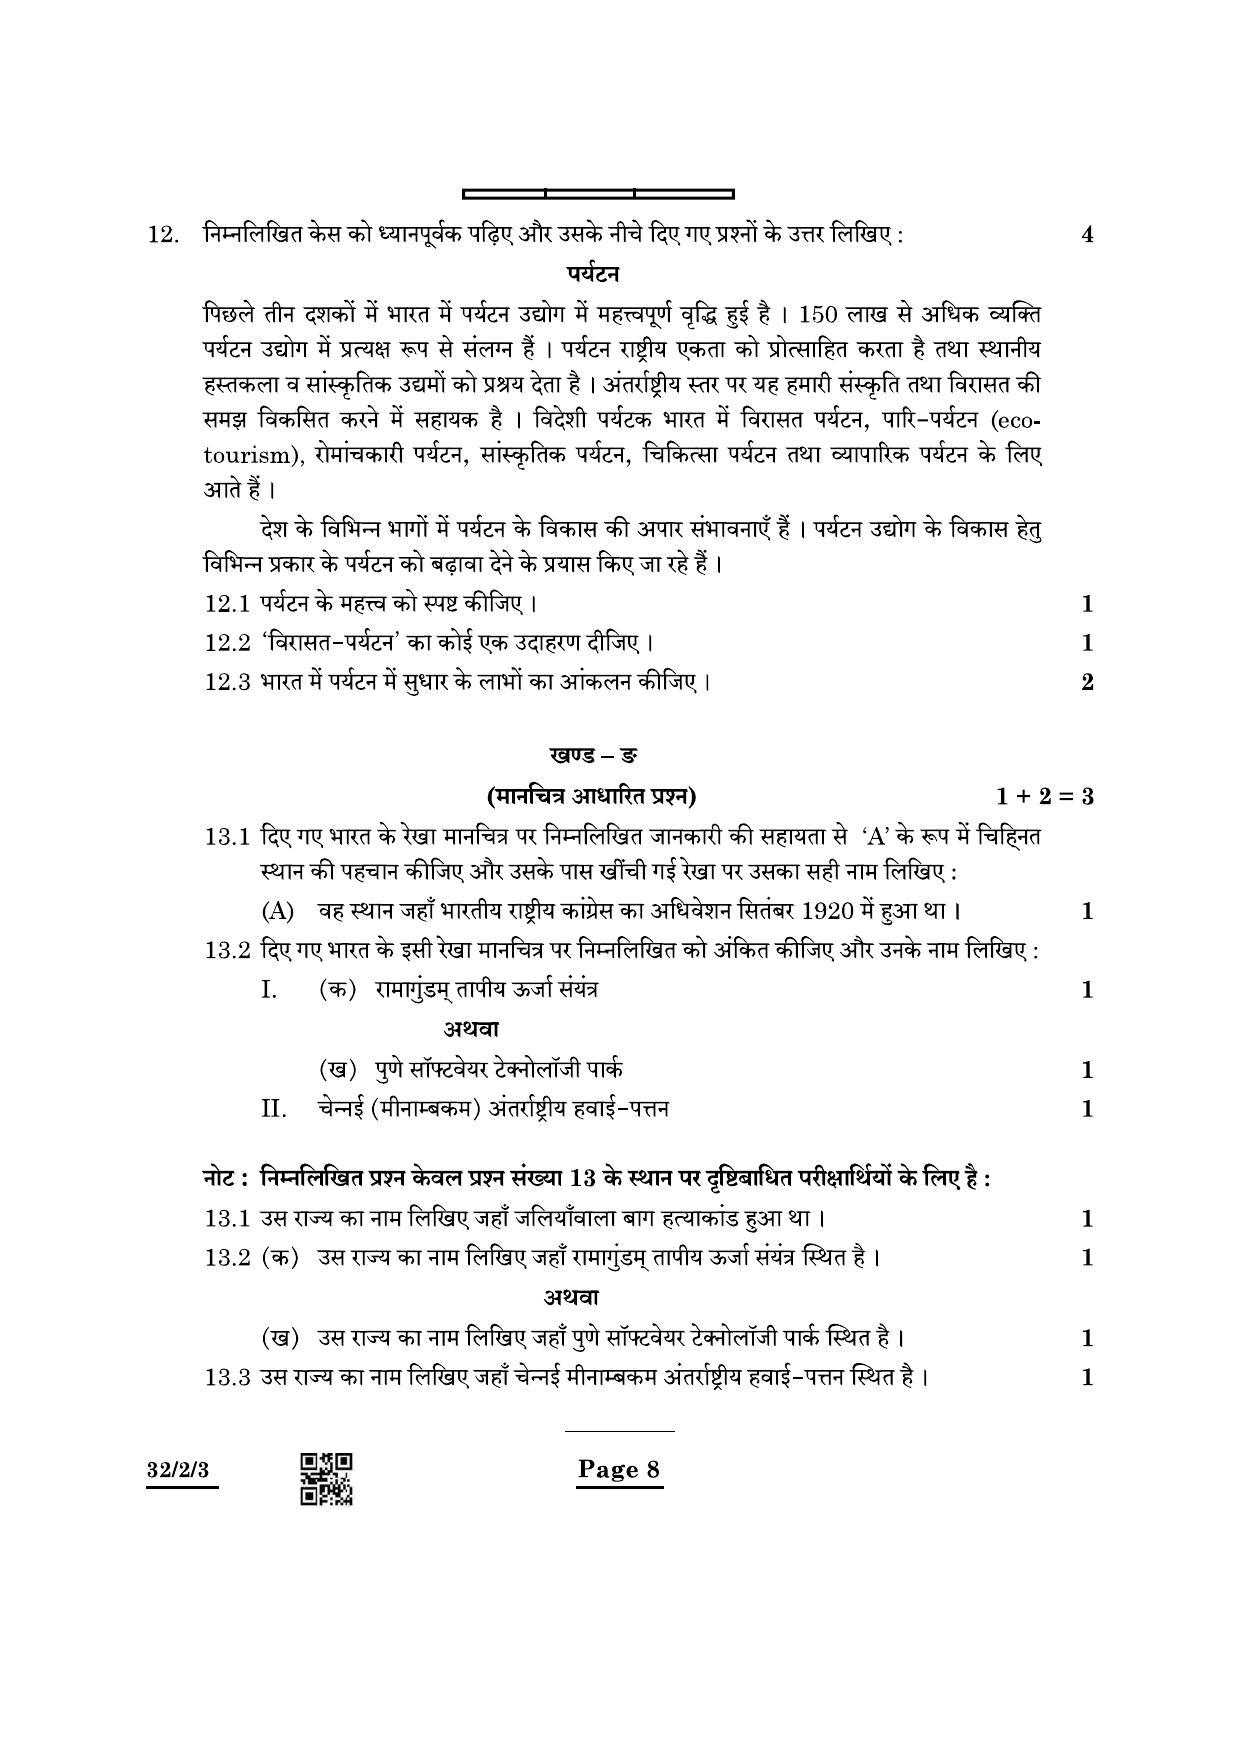 CBSE Class 10 32-2-3 Social Science 2022 Question Paper - Page 8